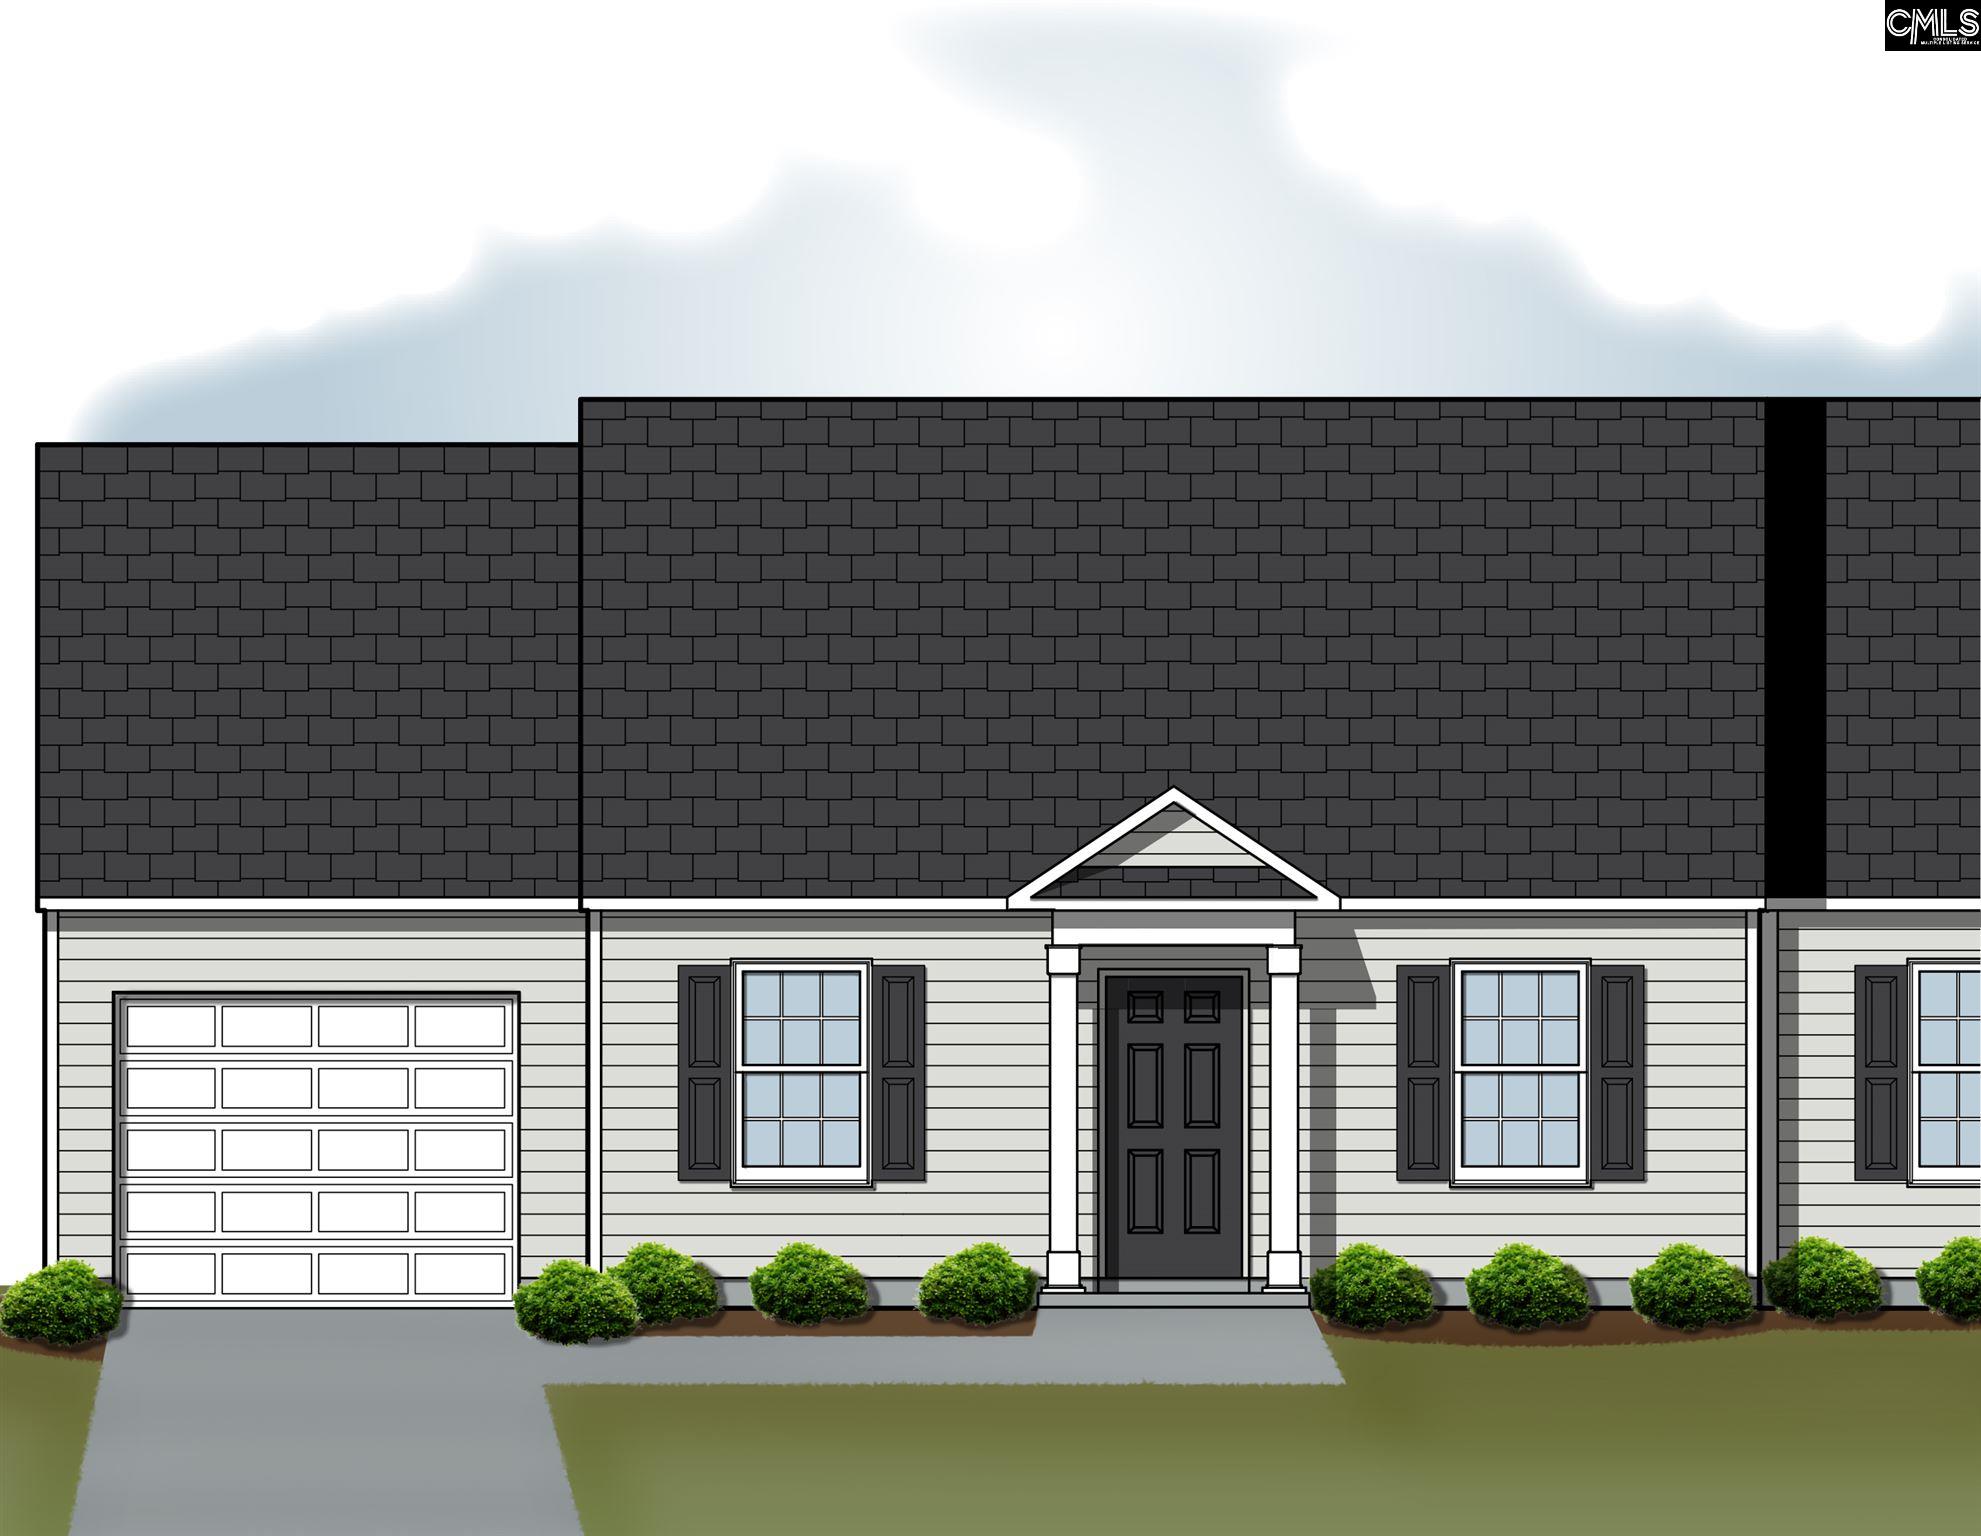 421 Pitchling (lot 18) Columbia, SC 29223